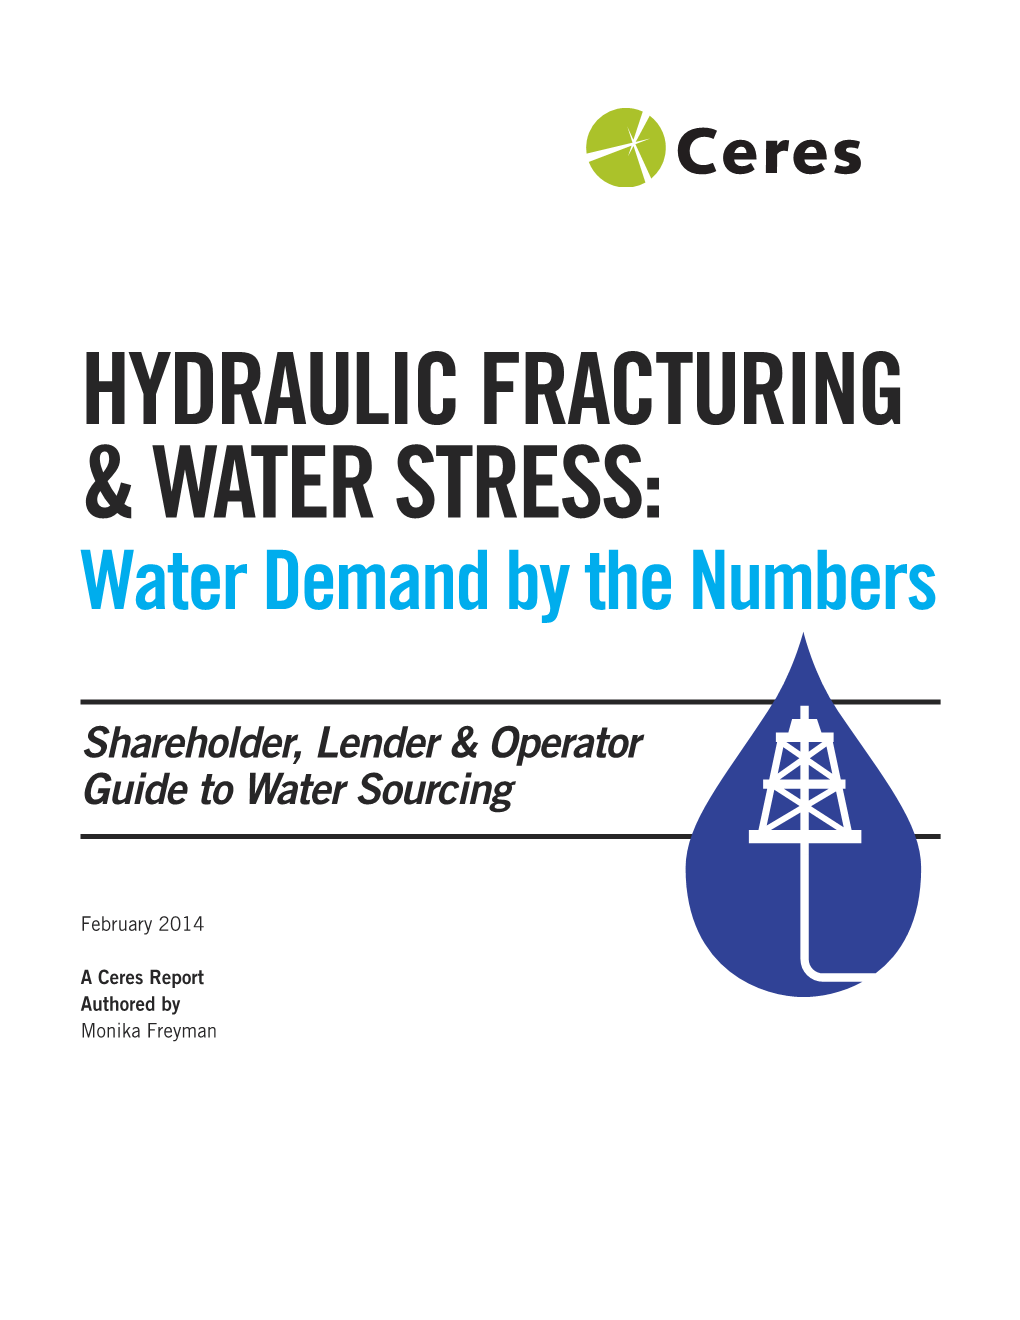 Hydraulic Fracturing & Water Stress